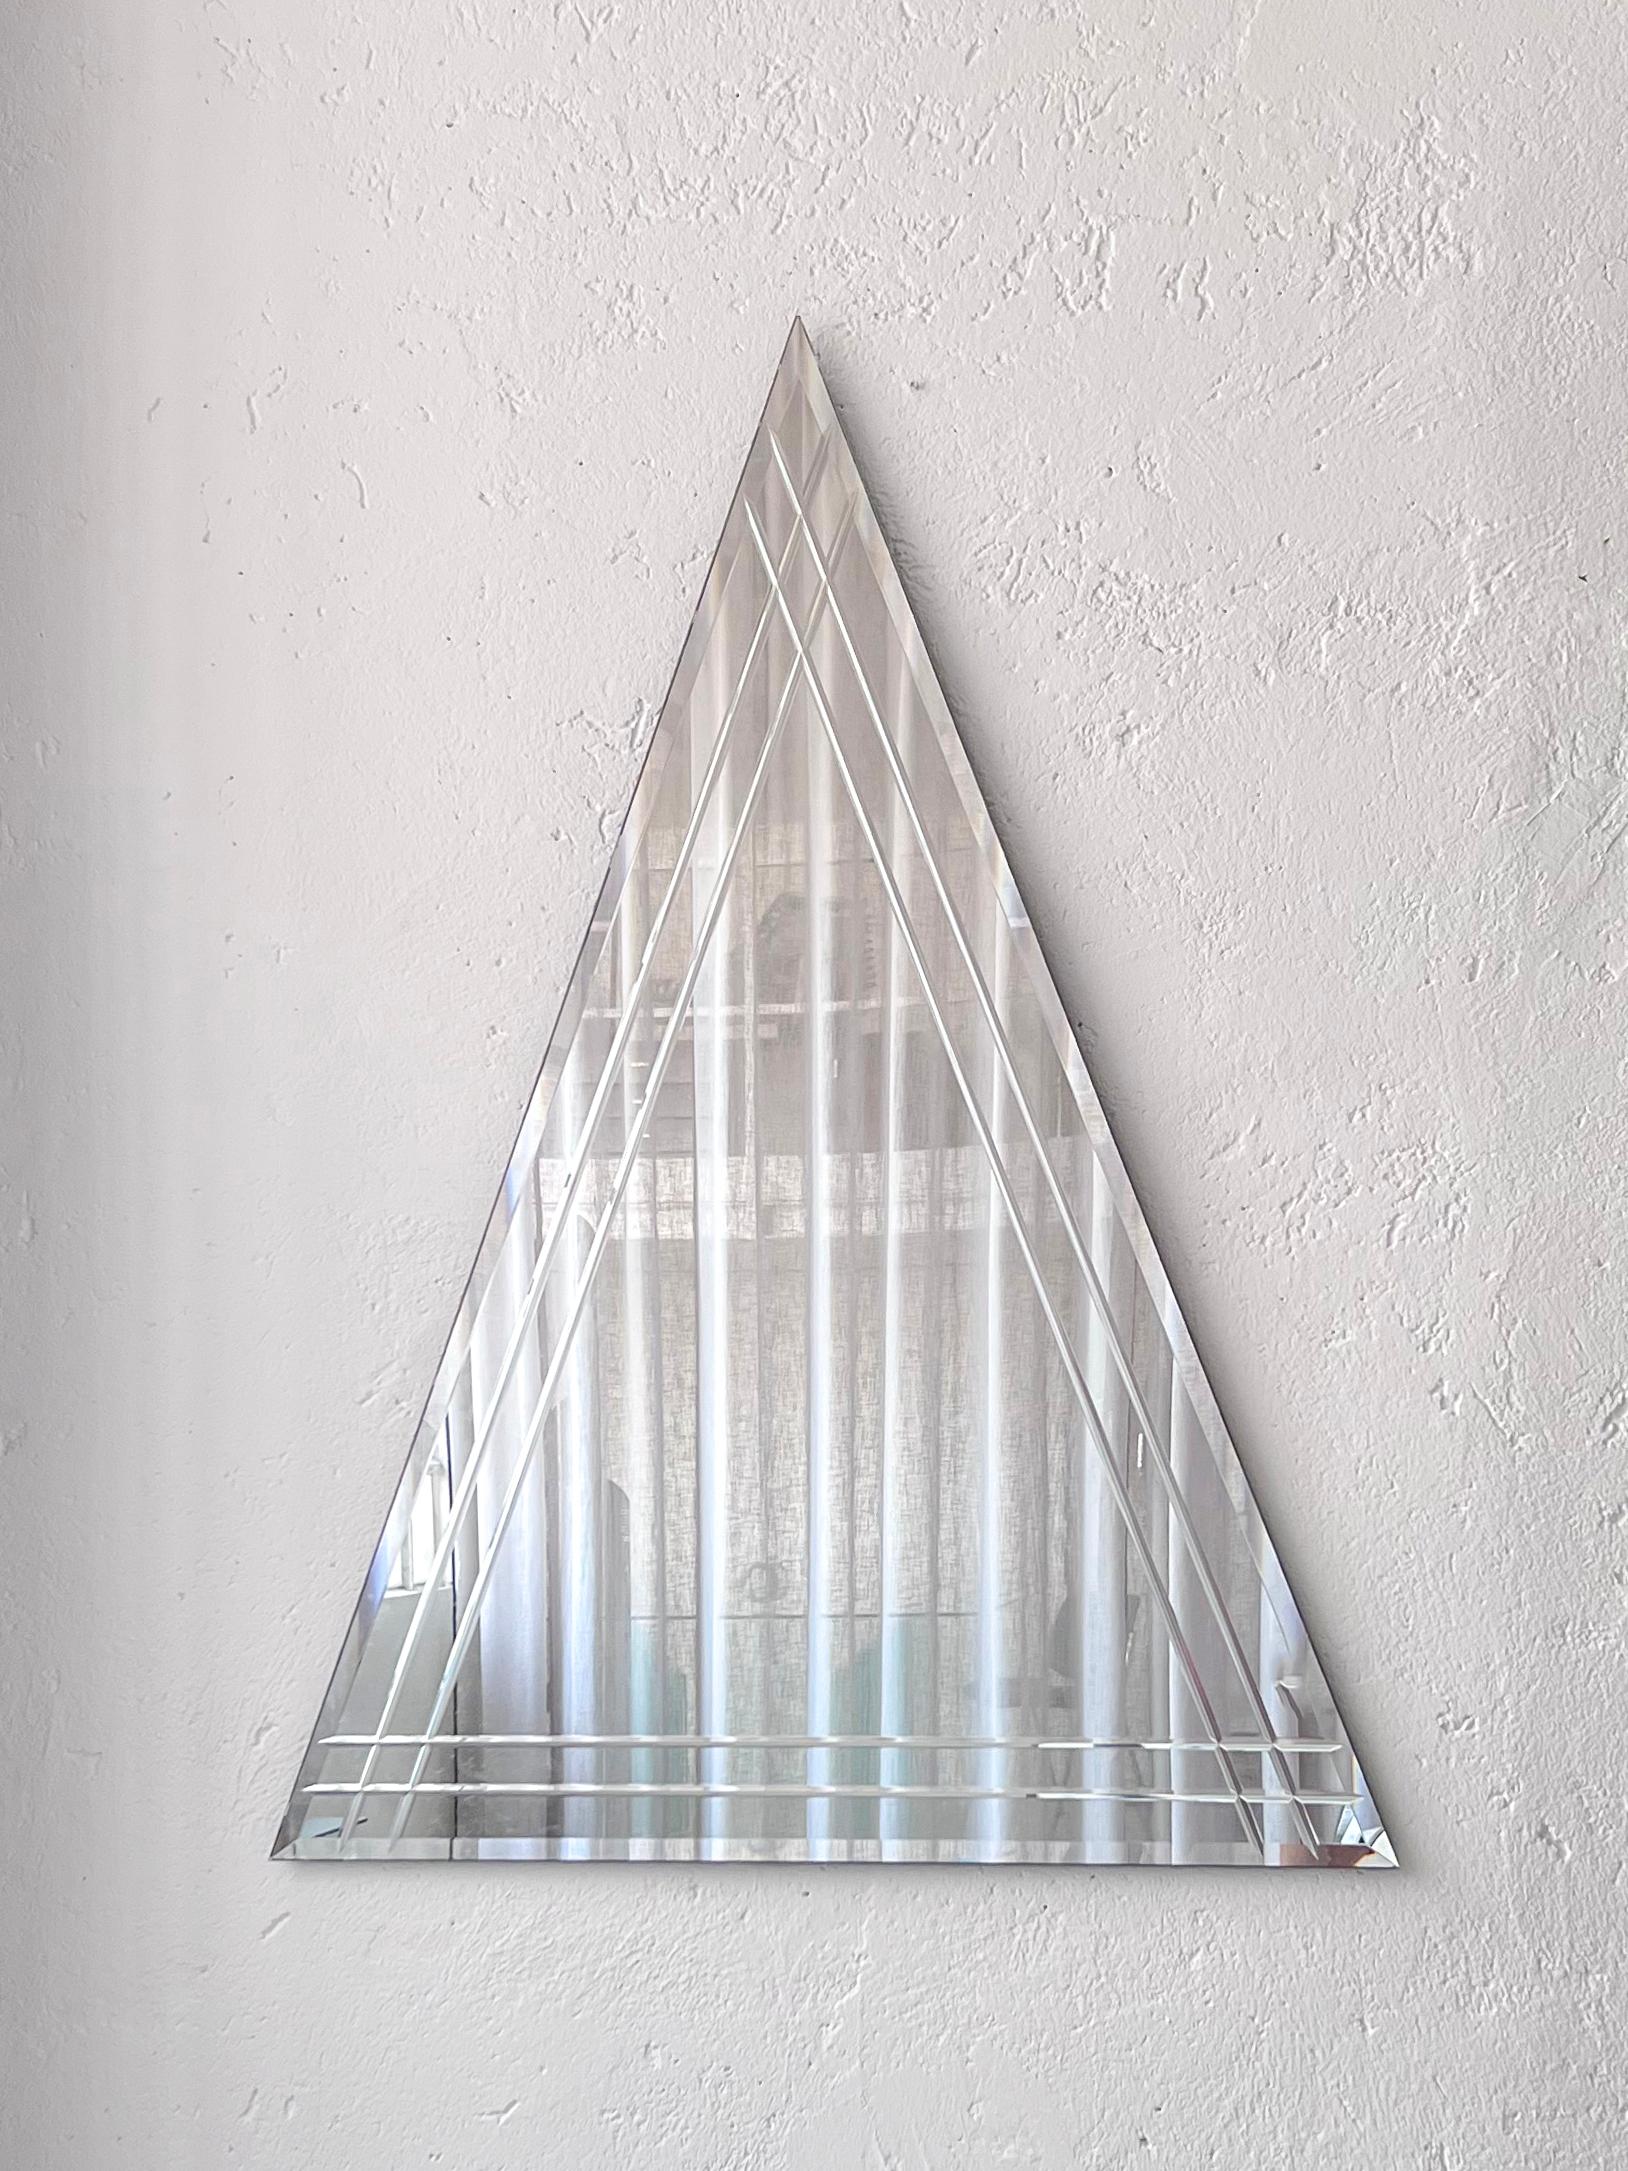 European Vintage Big Triangular Wall Mounted Mirror with Beveled Decoration For Sale